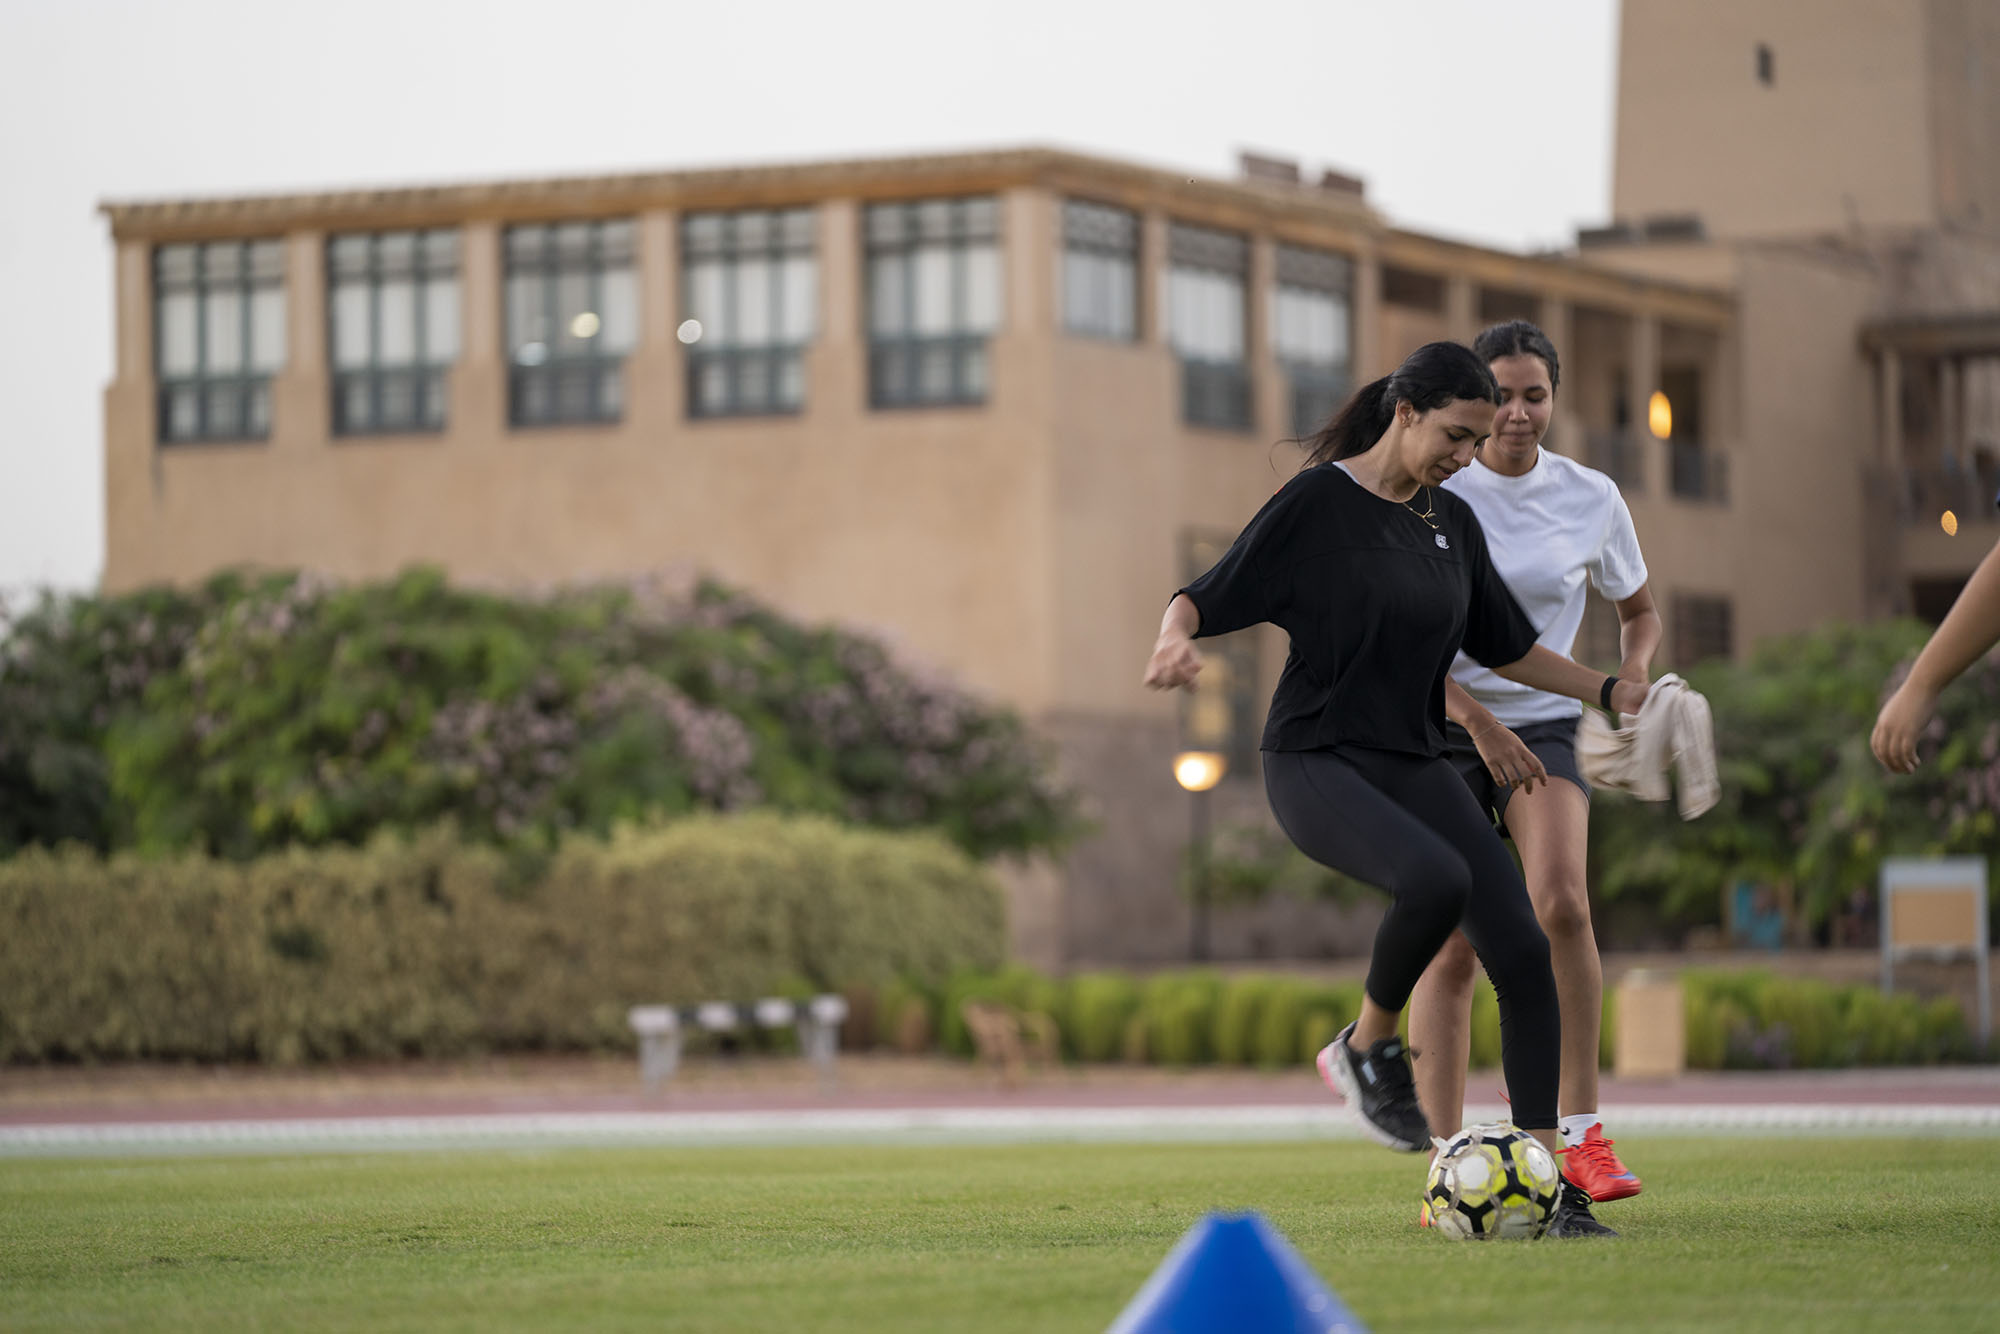 Two girls playing soccer in a soccer field